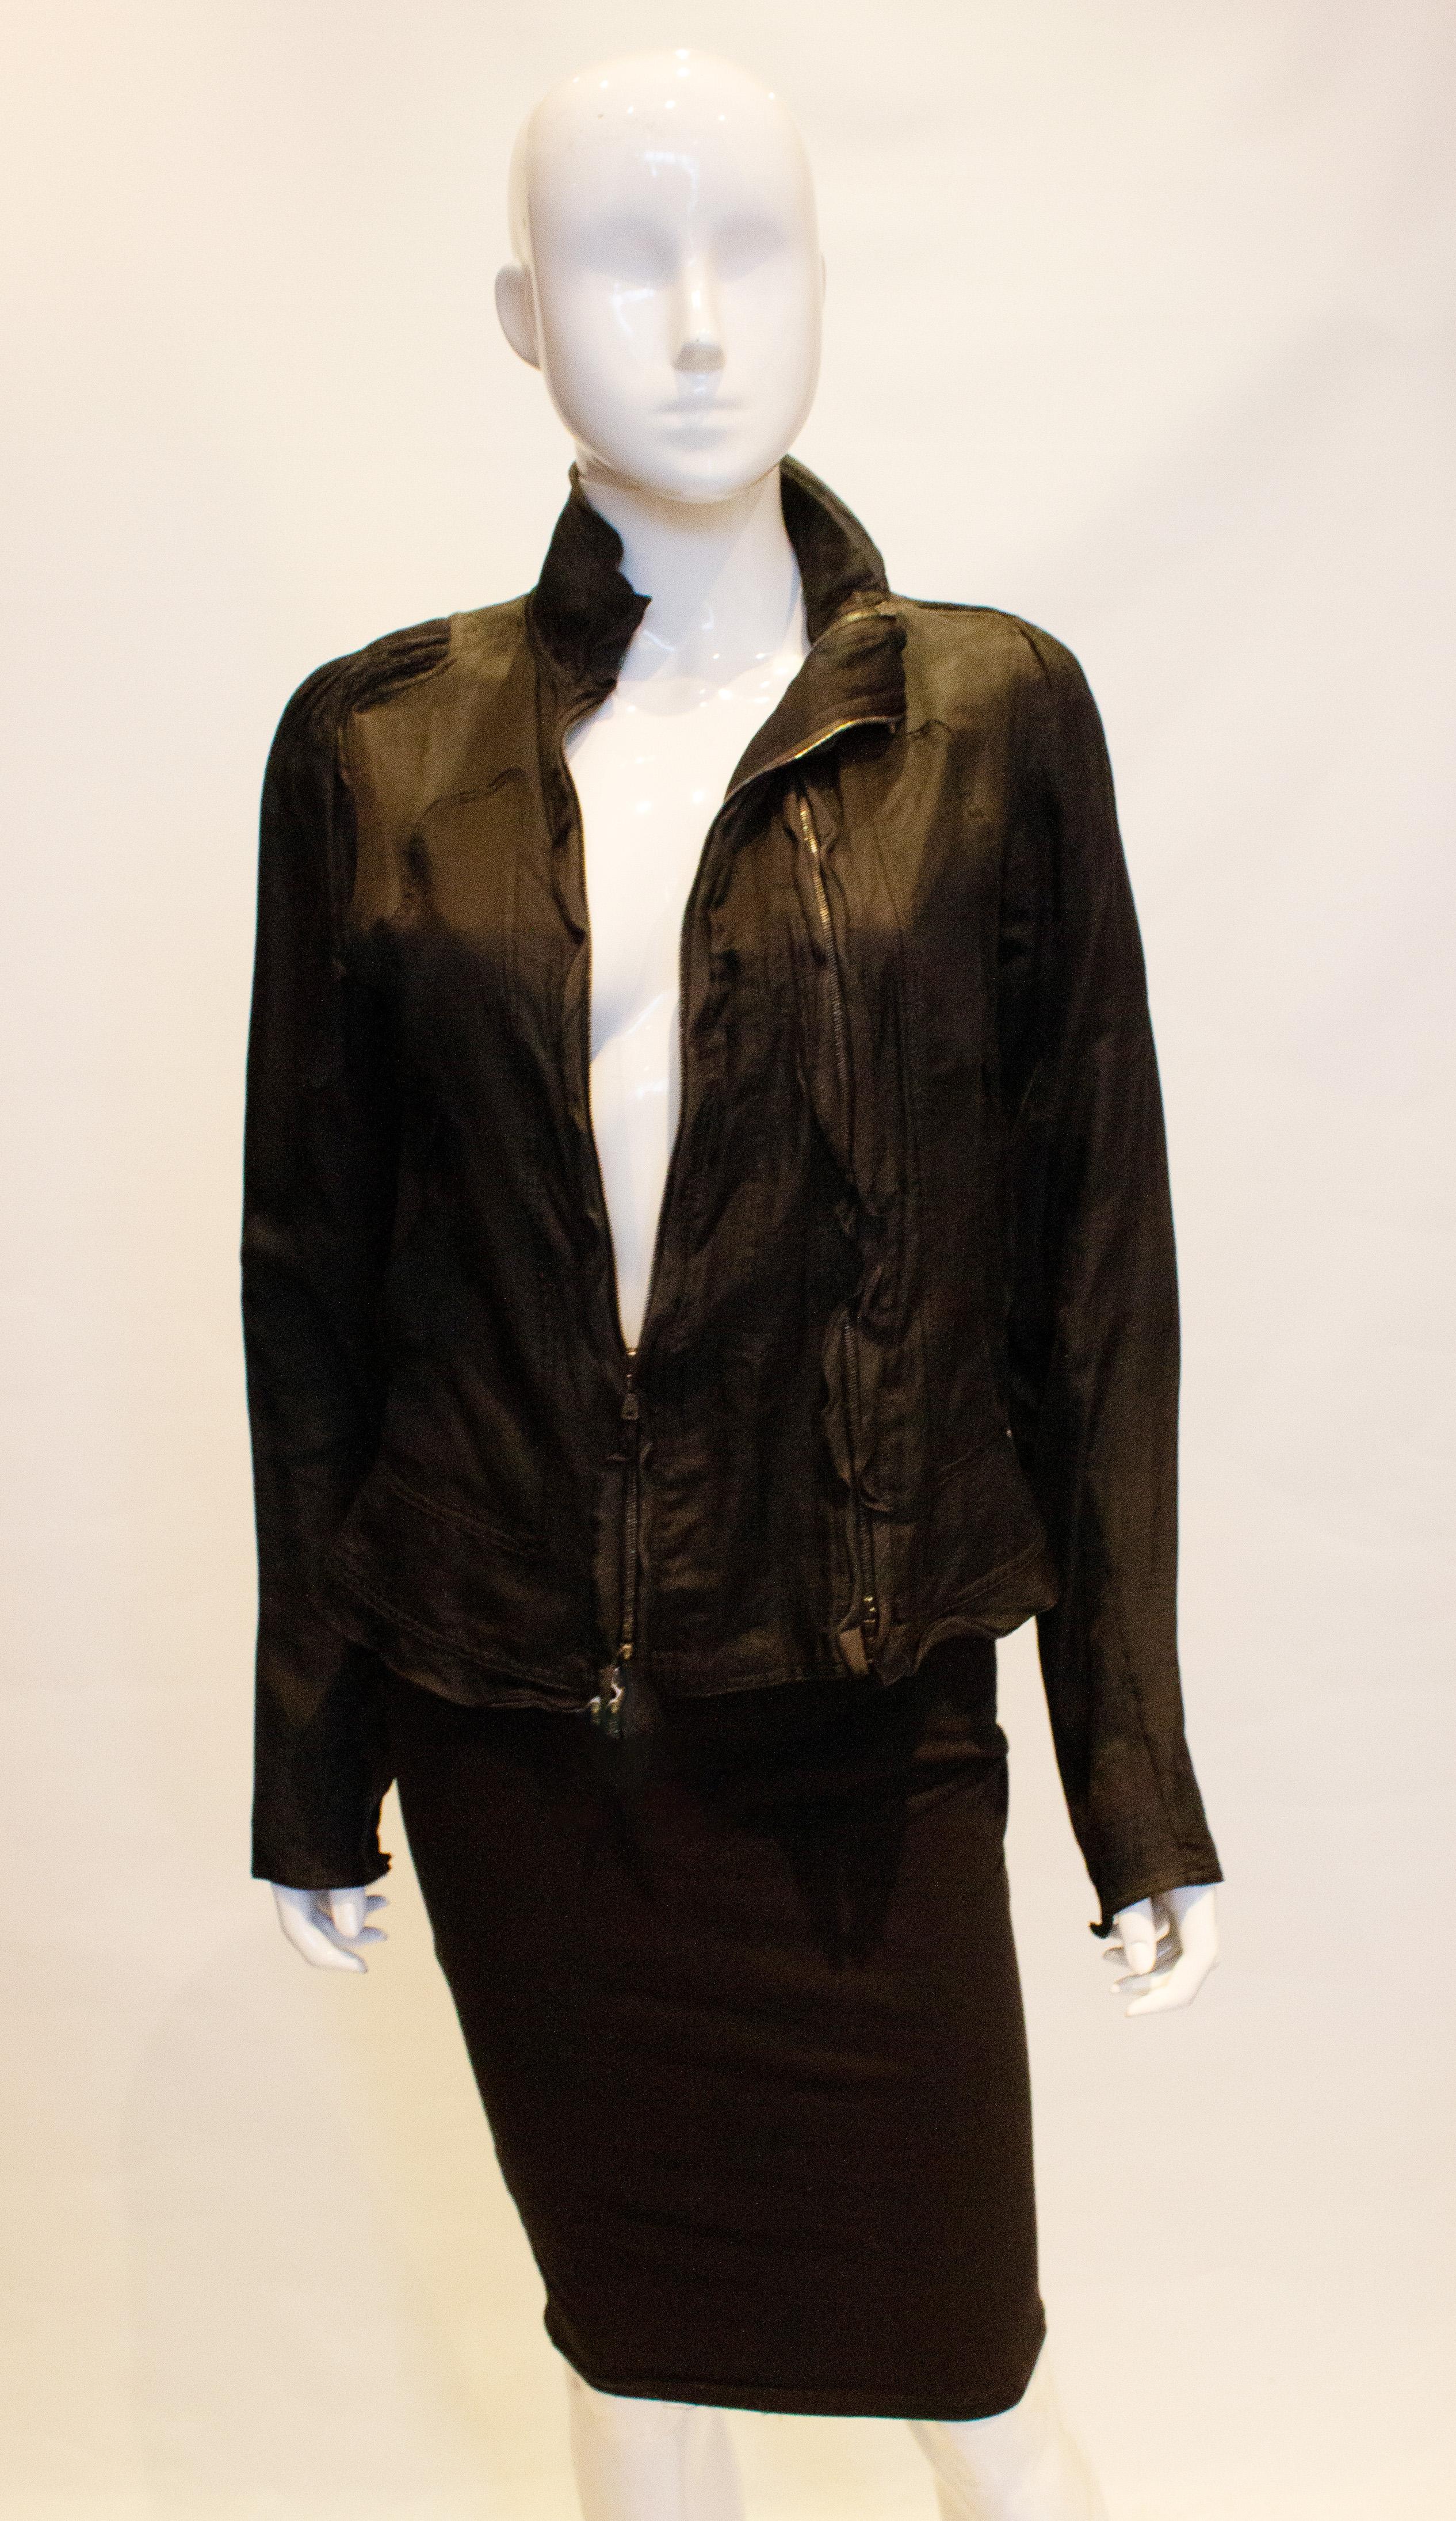 A chic vintage jacket by Yves Saint Laurent. The jacket has an unusual double zip opening at the front,  with zip detail on the sleave and gathering on the shoulder.
Measurements: Bust 37'', length 23''